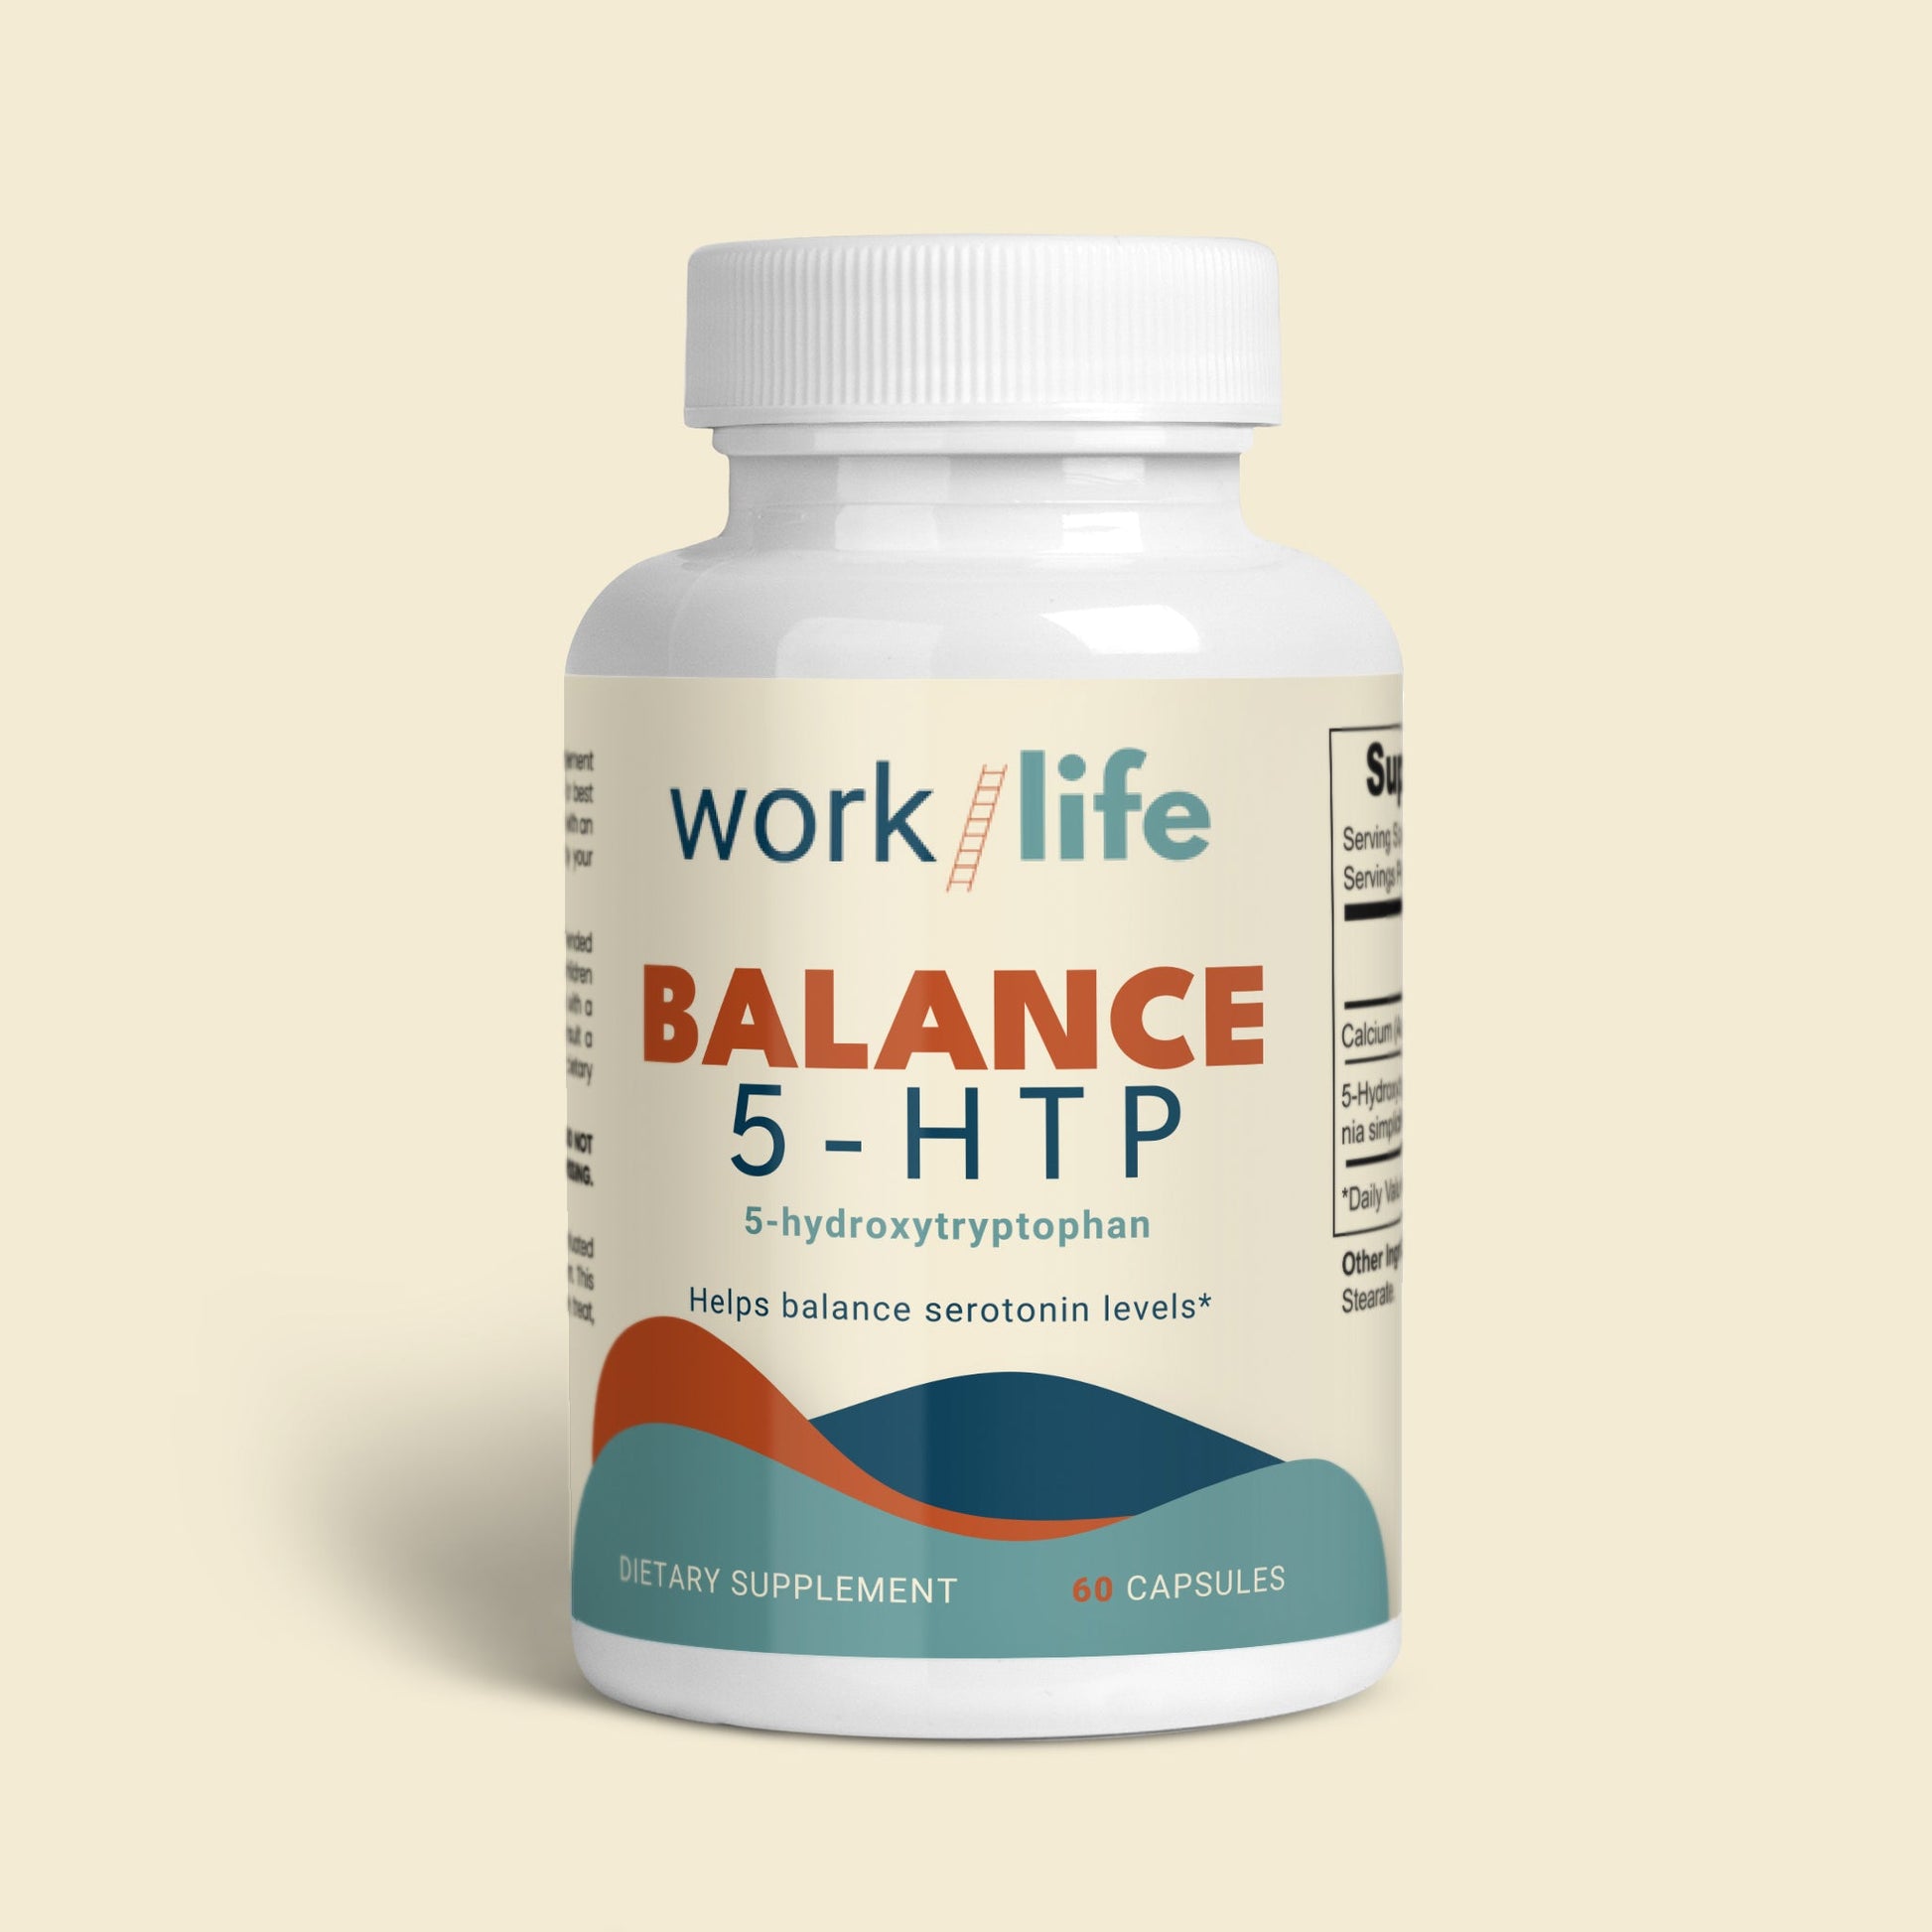 5-HTP Balance, Work-Life Supplements, bottle of 5-Hydroxytryptophan capsules